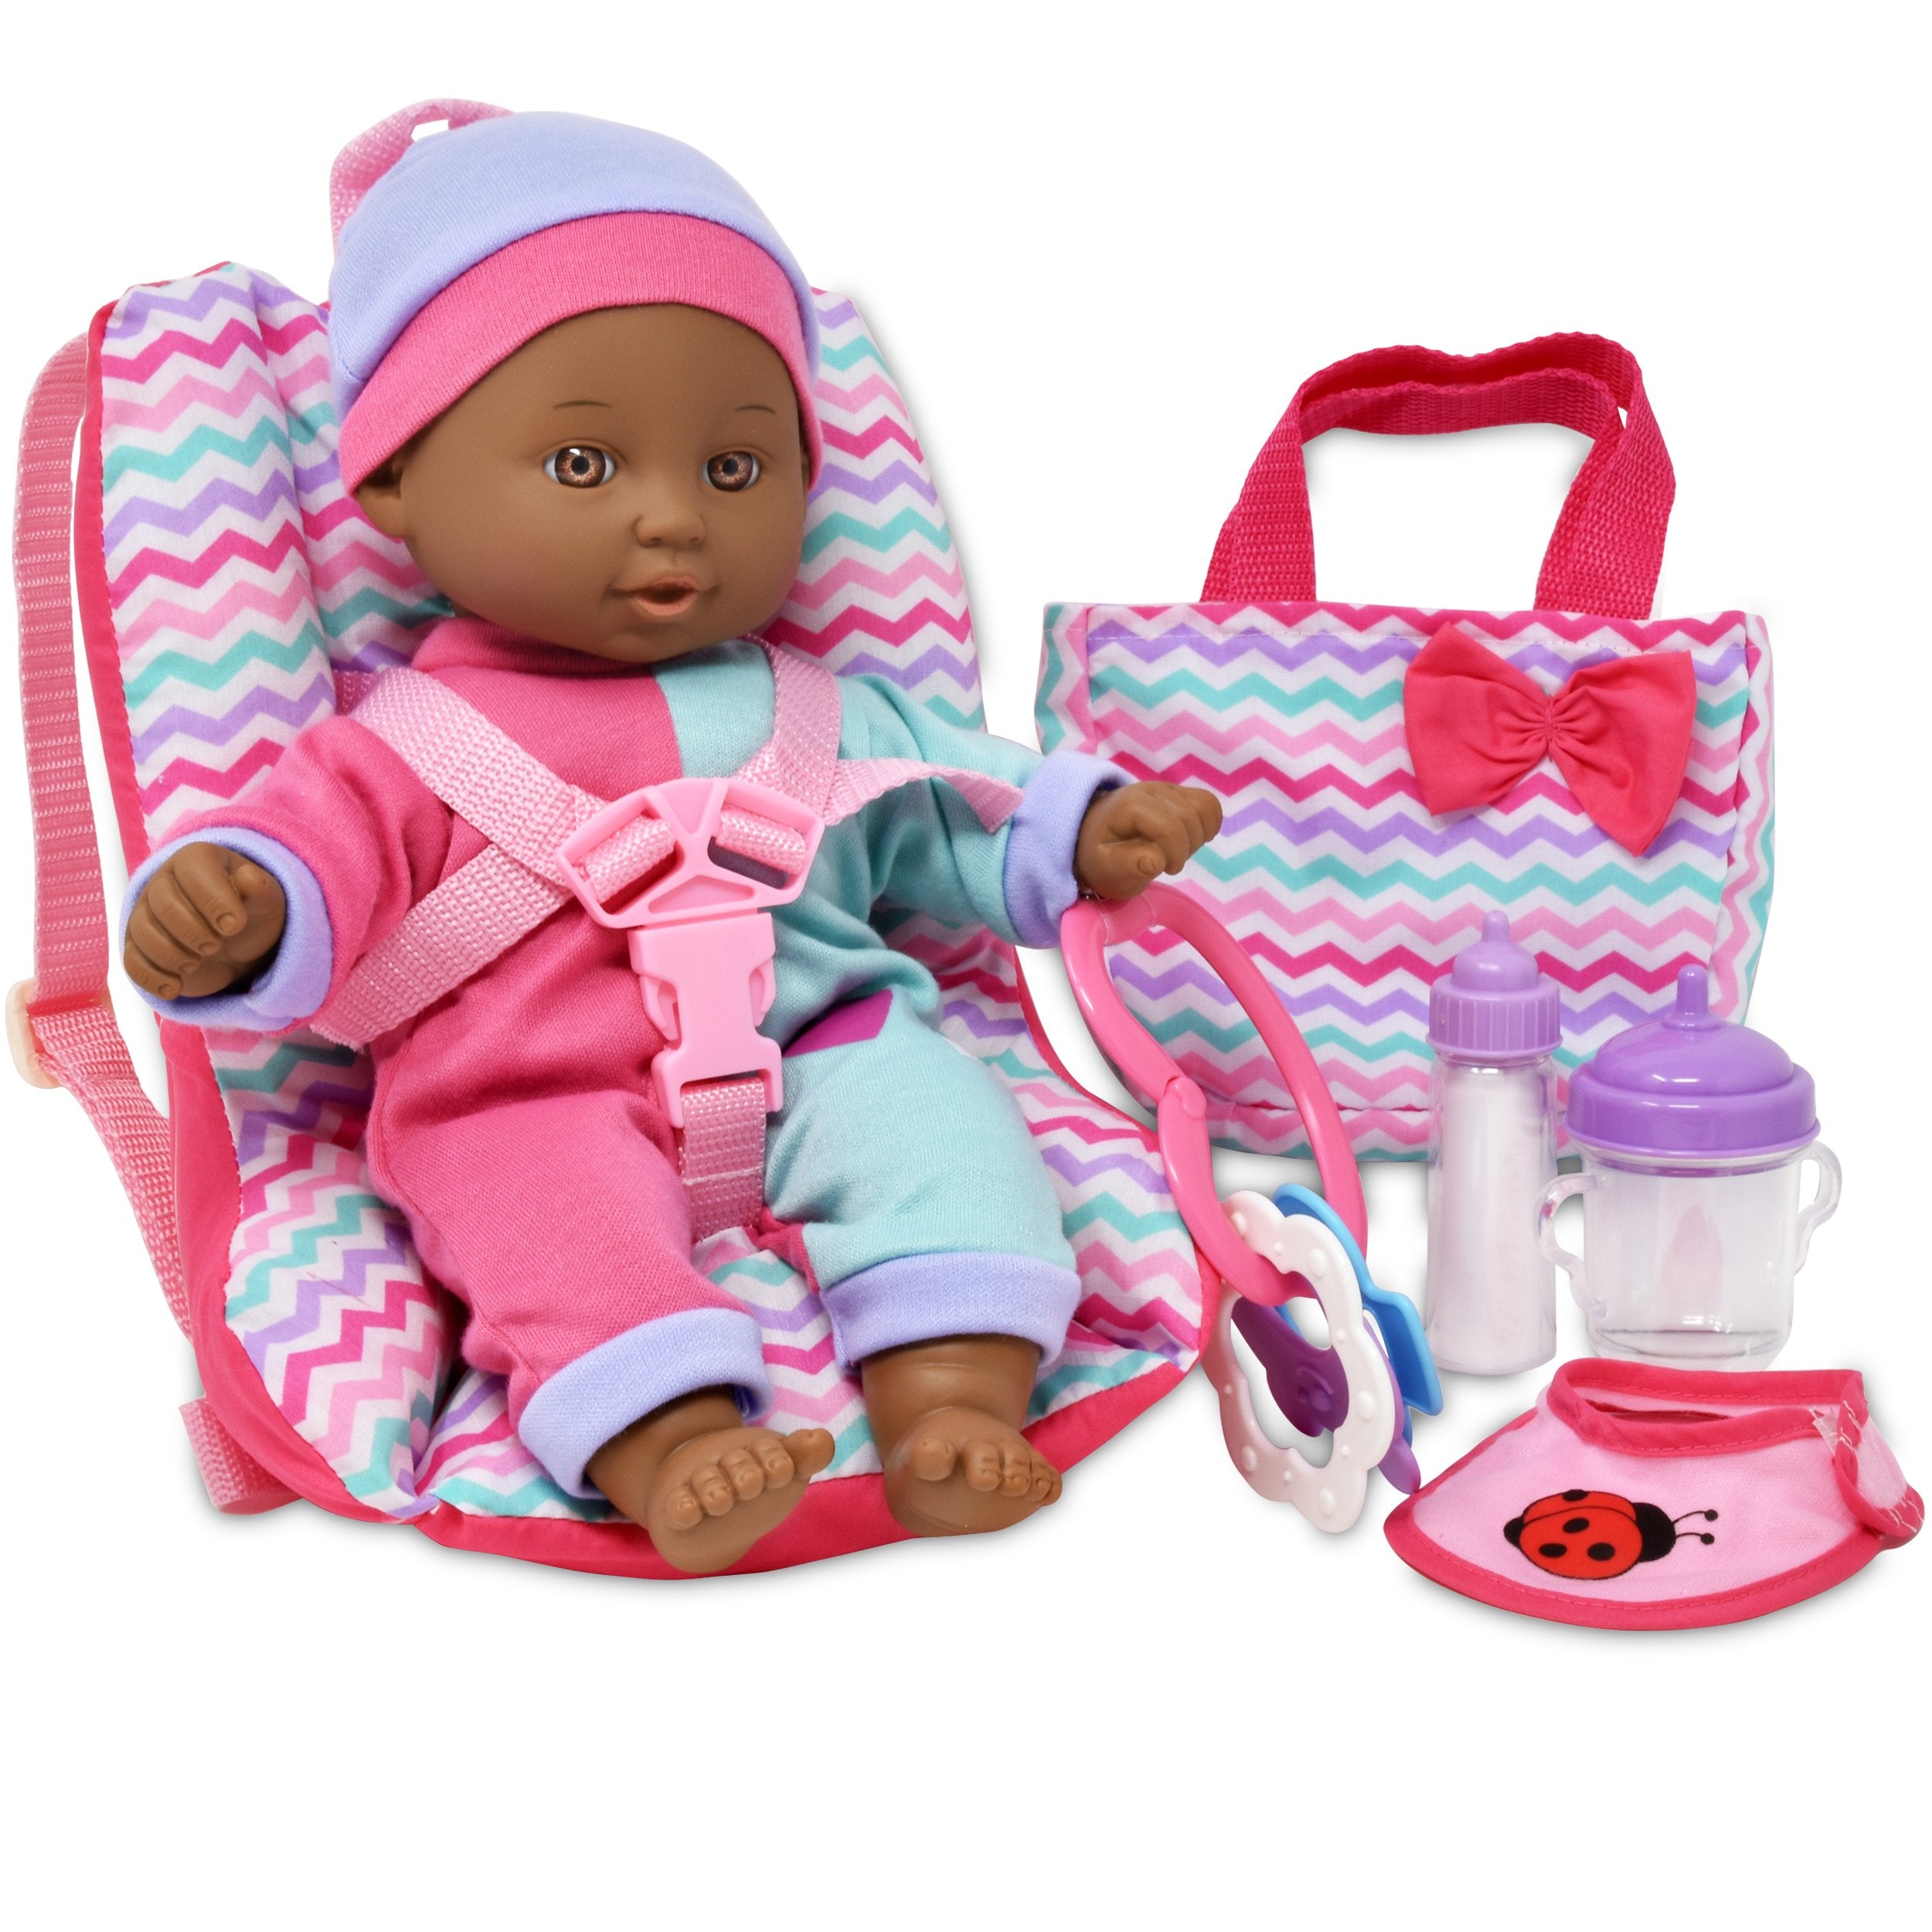 doll car seat carrier